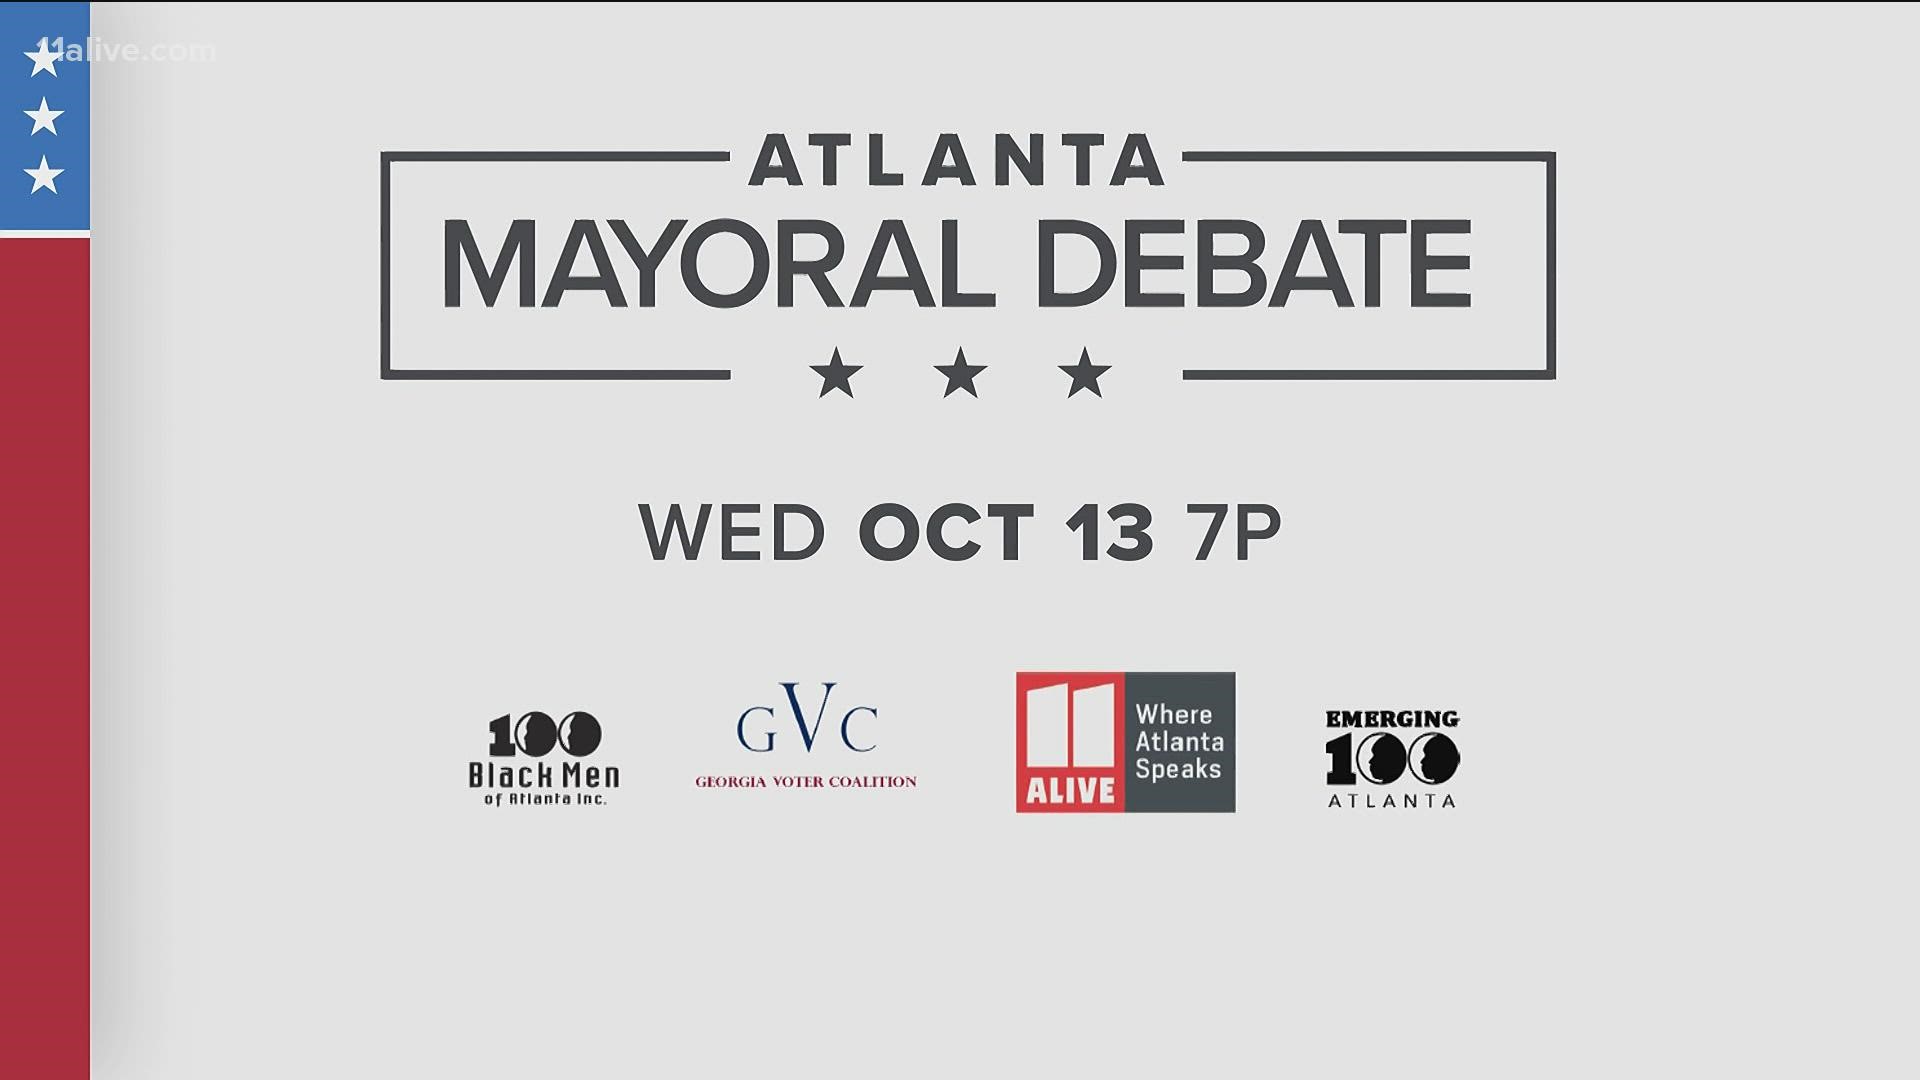 11Alive will hold a mayoral debate next Wednesday, Oct. 13.